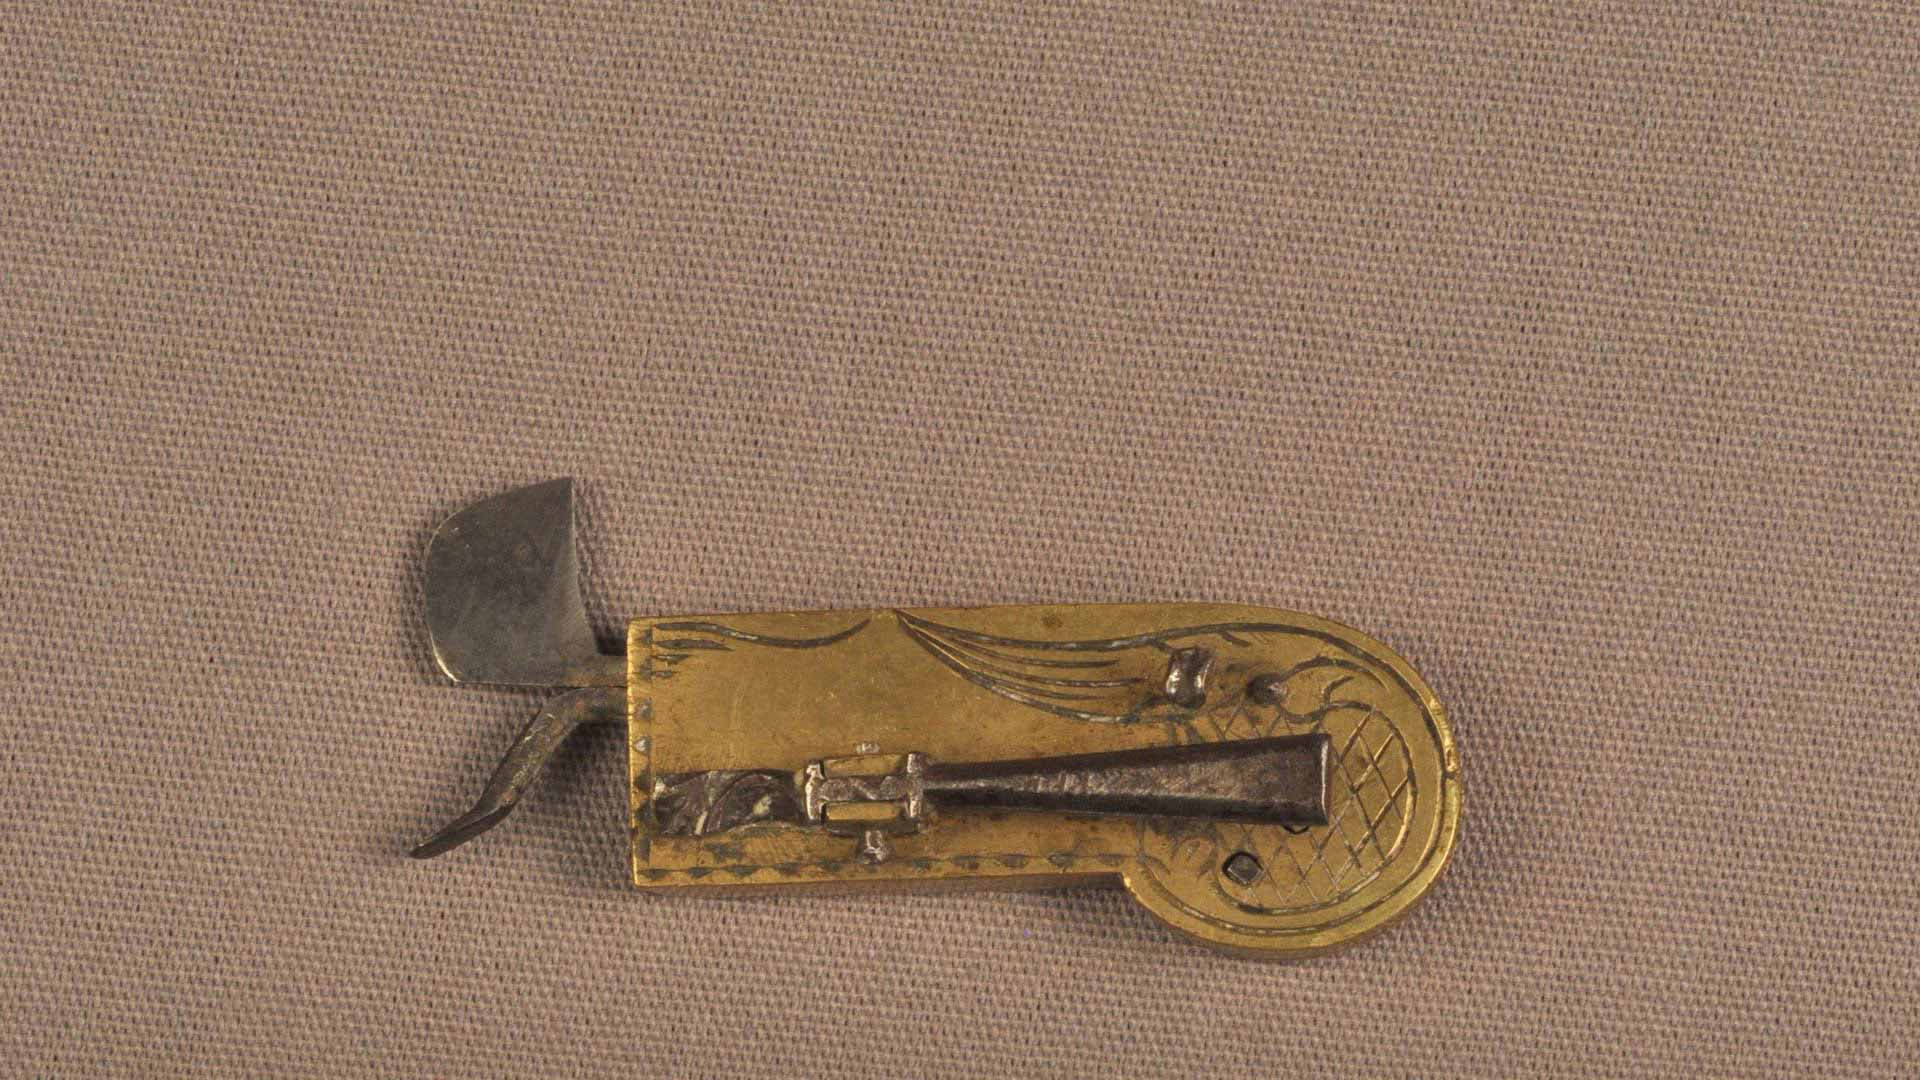 small metal device with a curved metal edge and a slightly curved metal point used for bloodletting